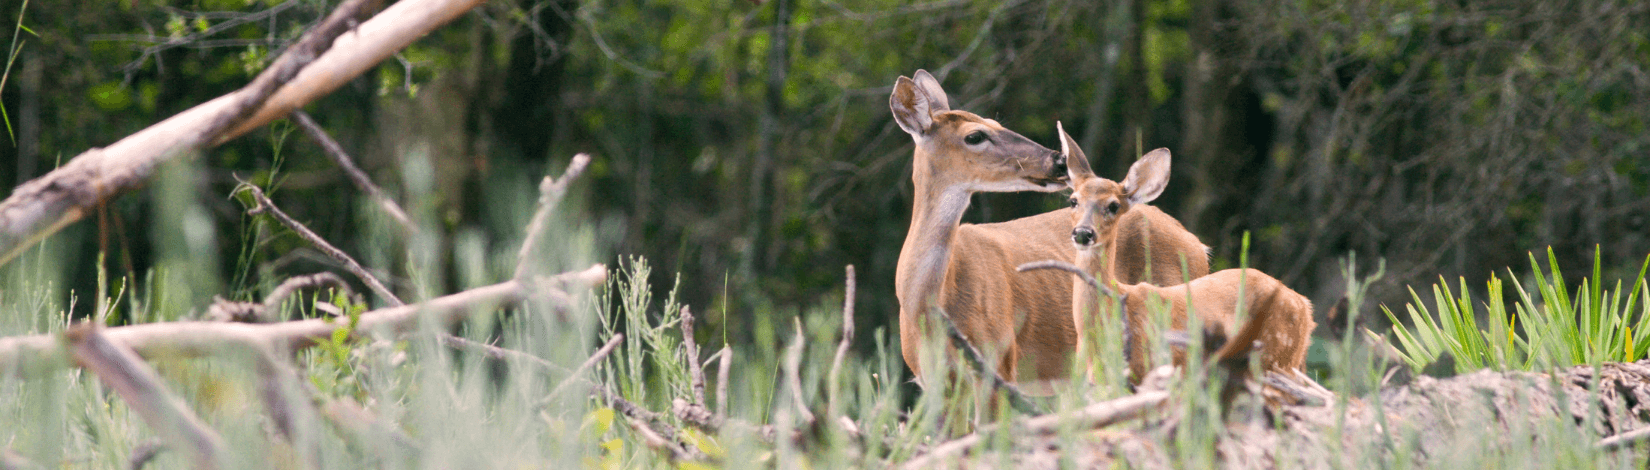 Doe and fawn at Ordway-Swisher Biological Station